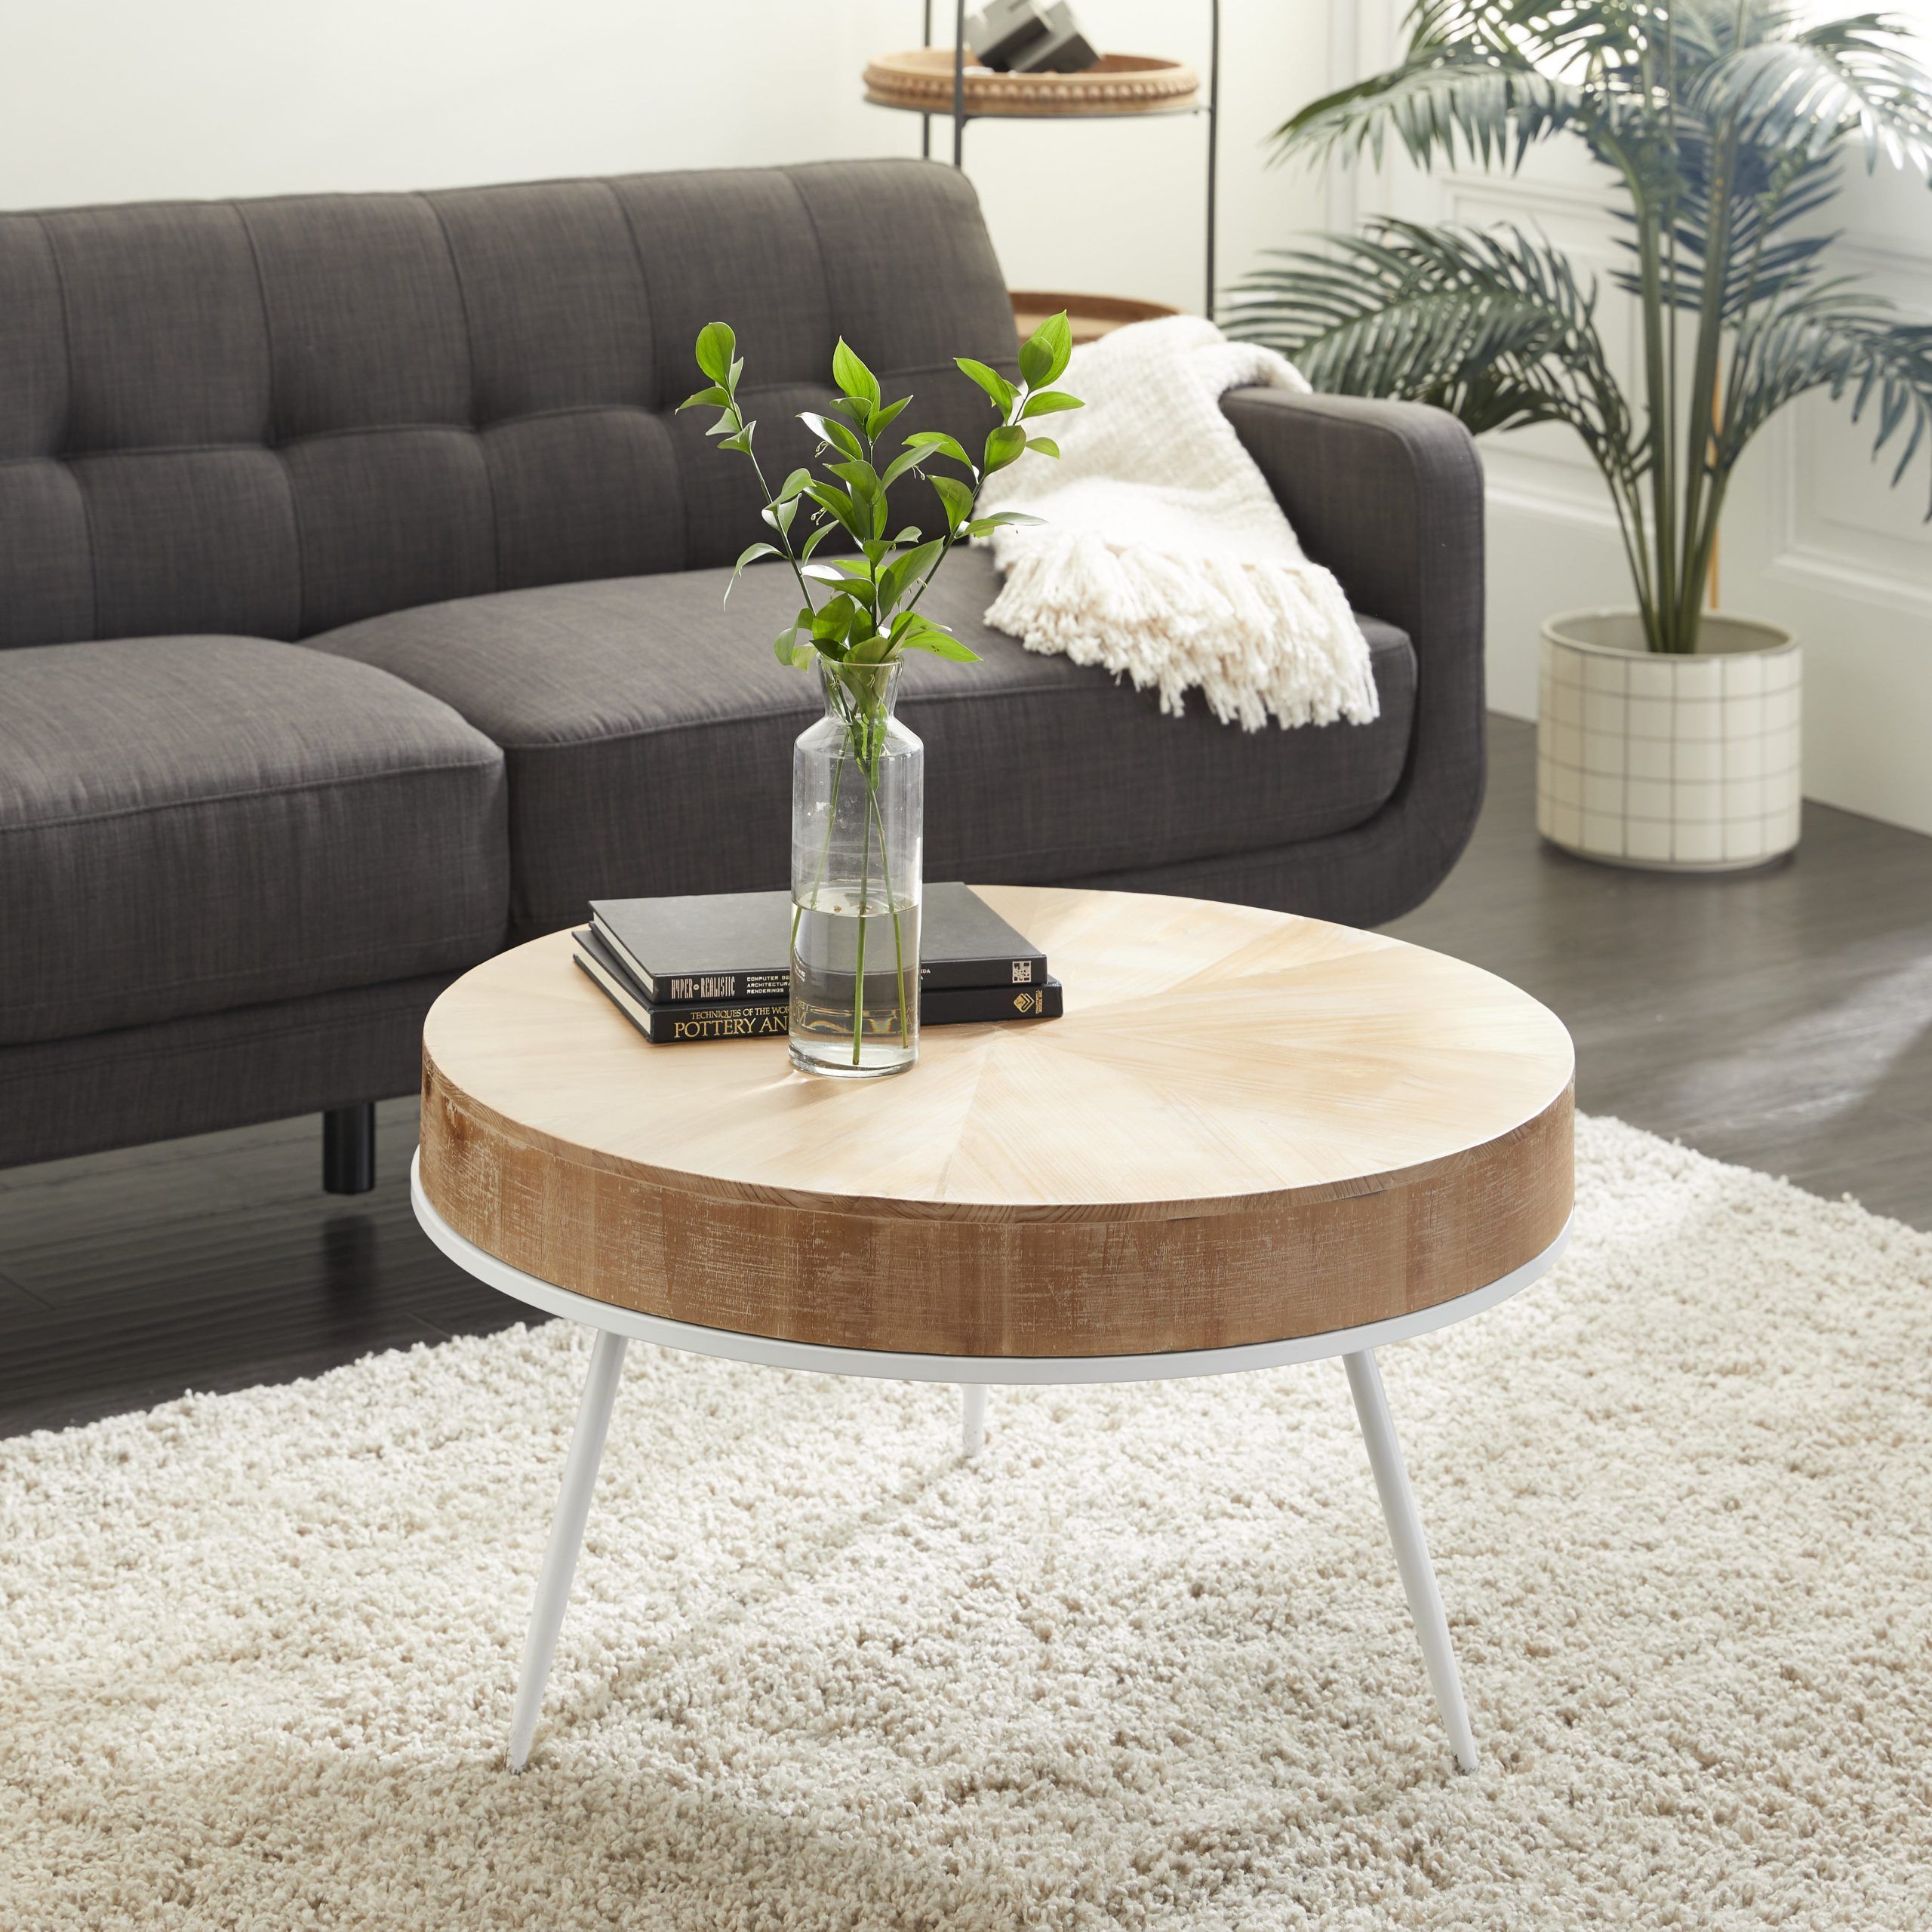 Decmode Round Natural Wood Top Coffee Table With Distressed White Metal In White T Base Seminar Coffee Tables (Gallery 6 of 20)